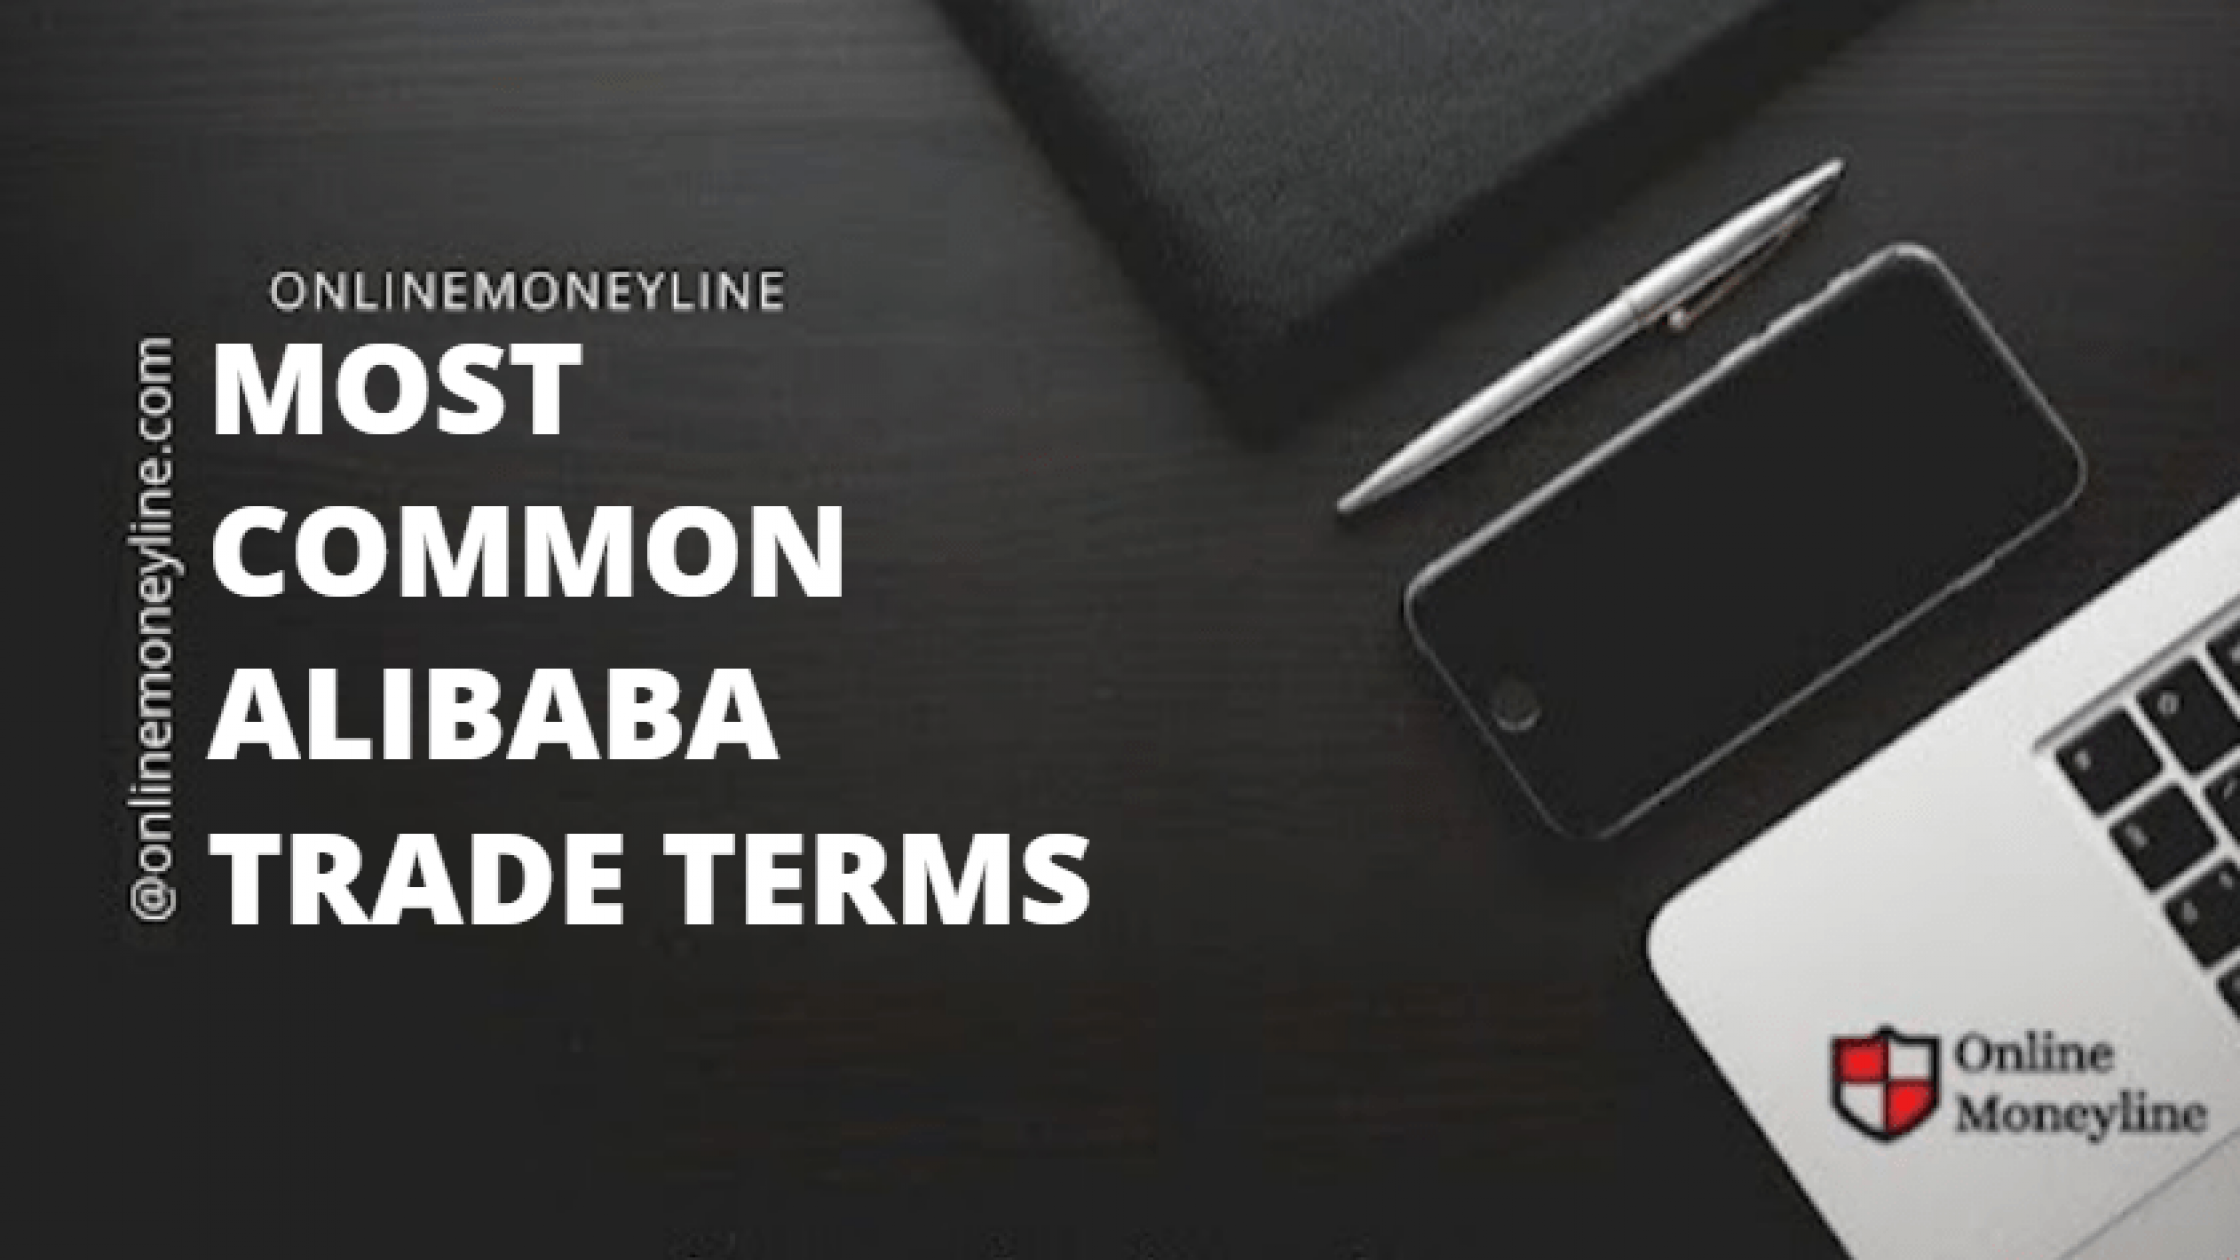 Most Common Alibaba Trade Terms